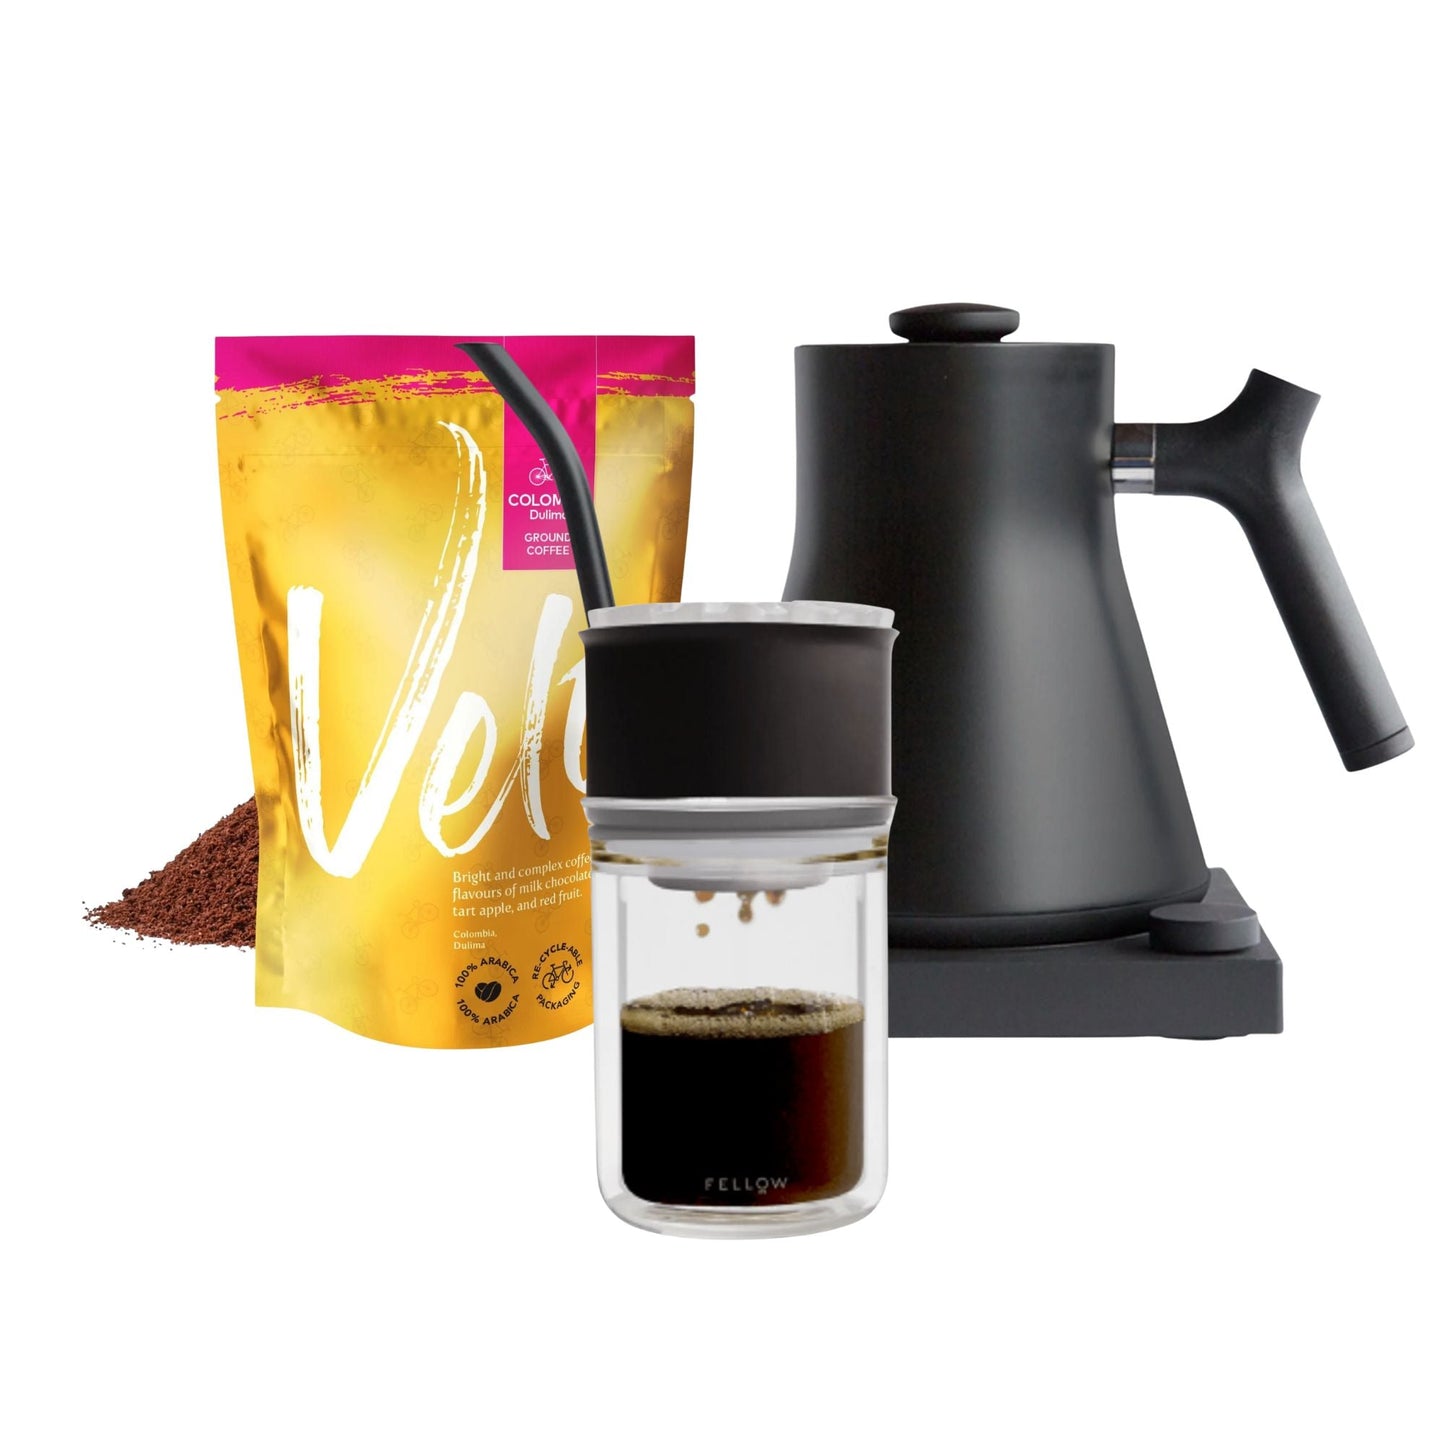 Fellow Stagg Pour Over Kit Bundle - Velo Coffee Roasters